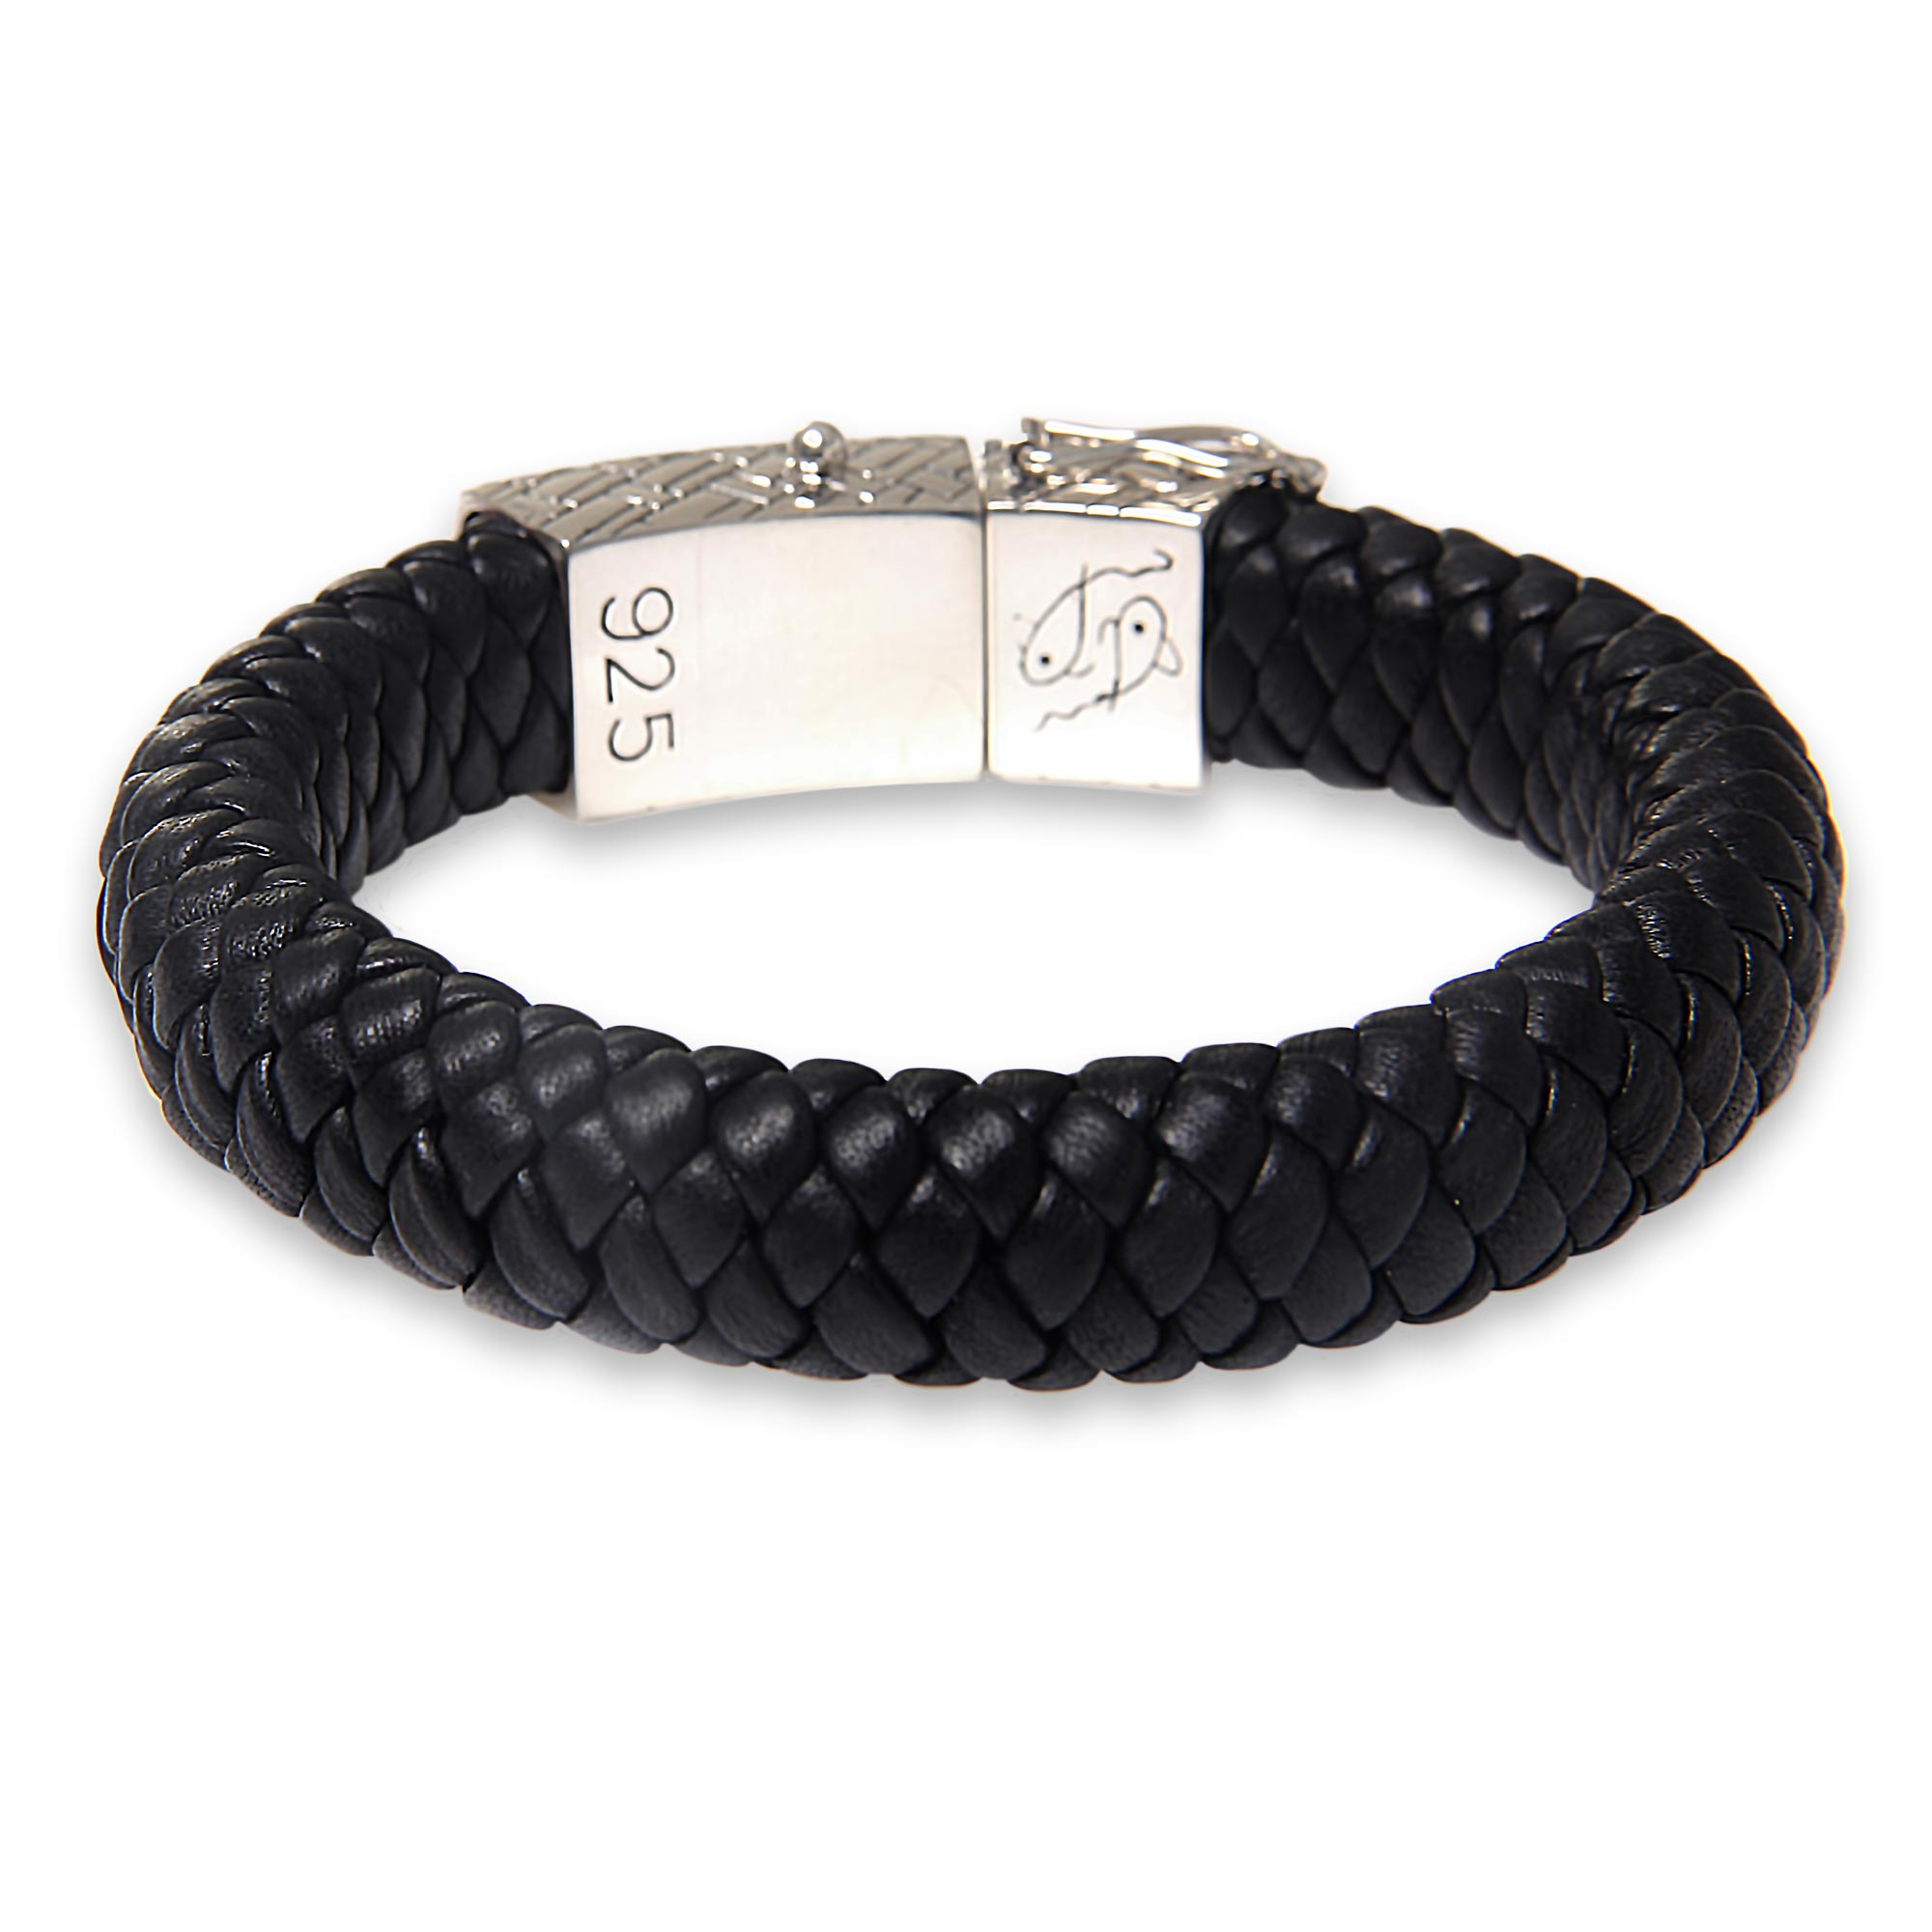 Men's Braided Leather and Silver Wristband Bracelet - Emperor | NOVICA